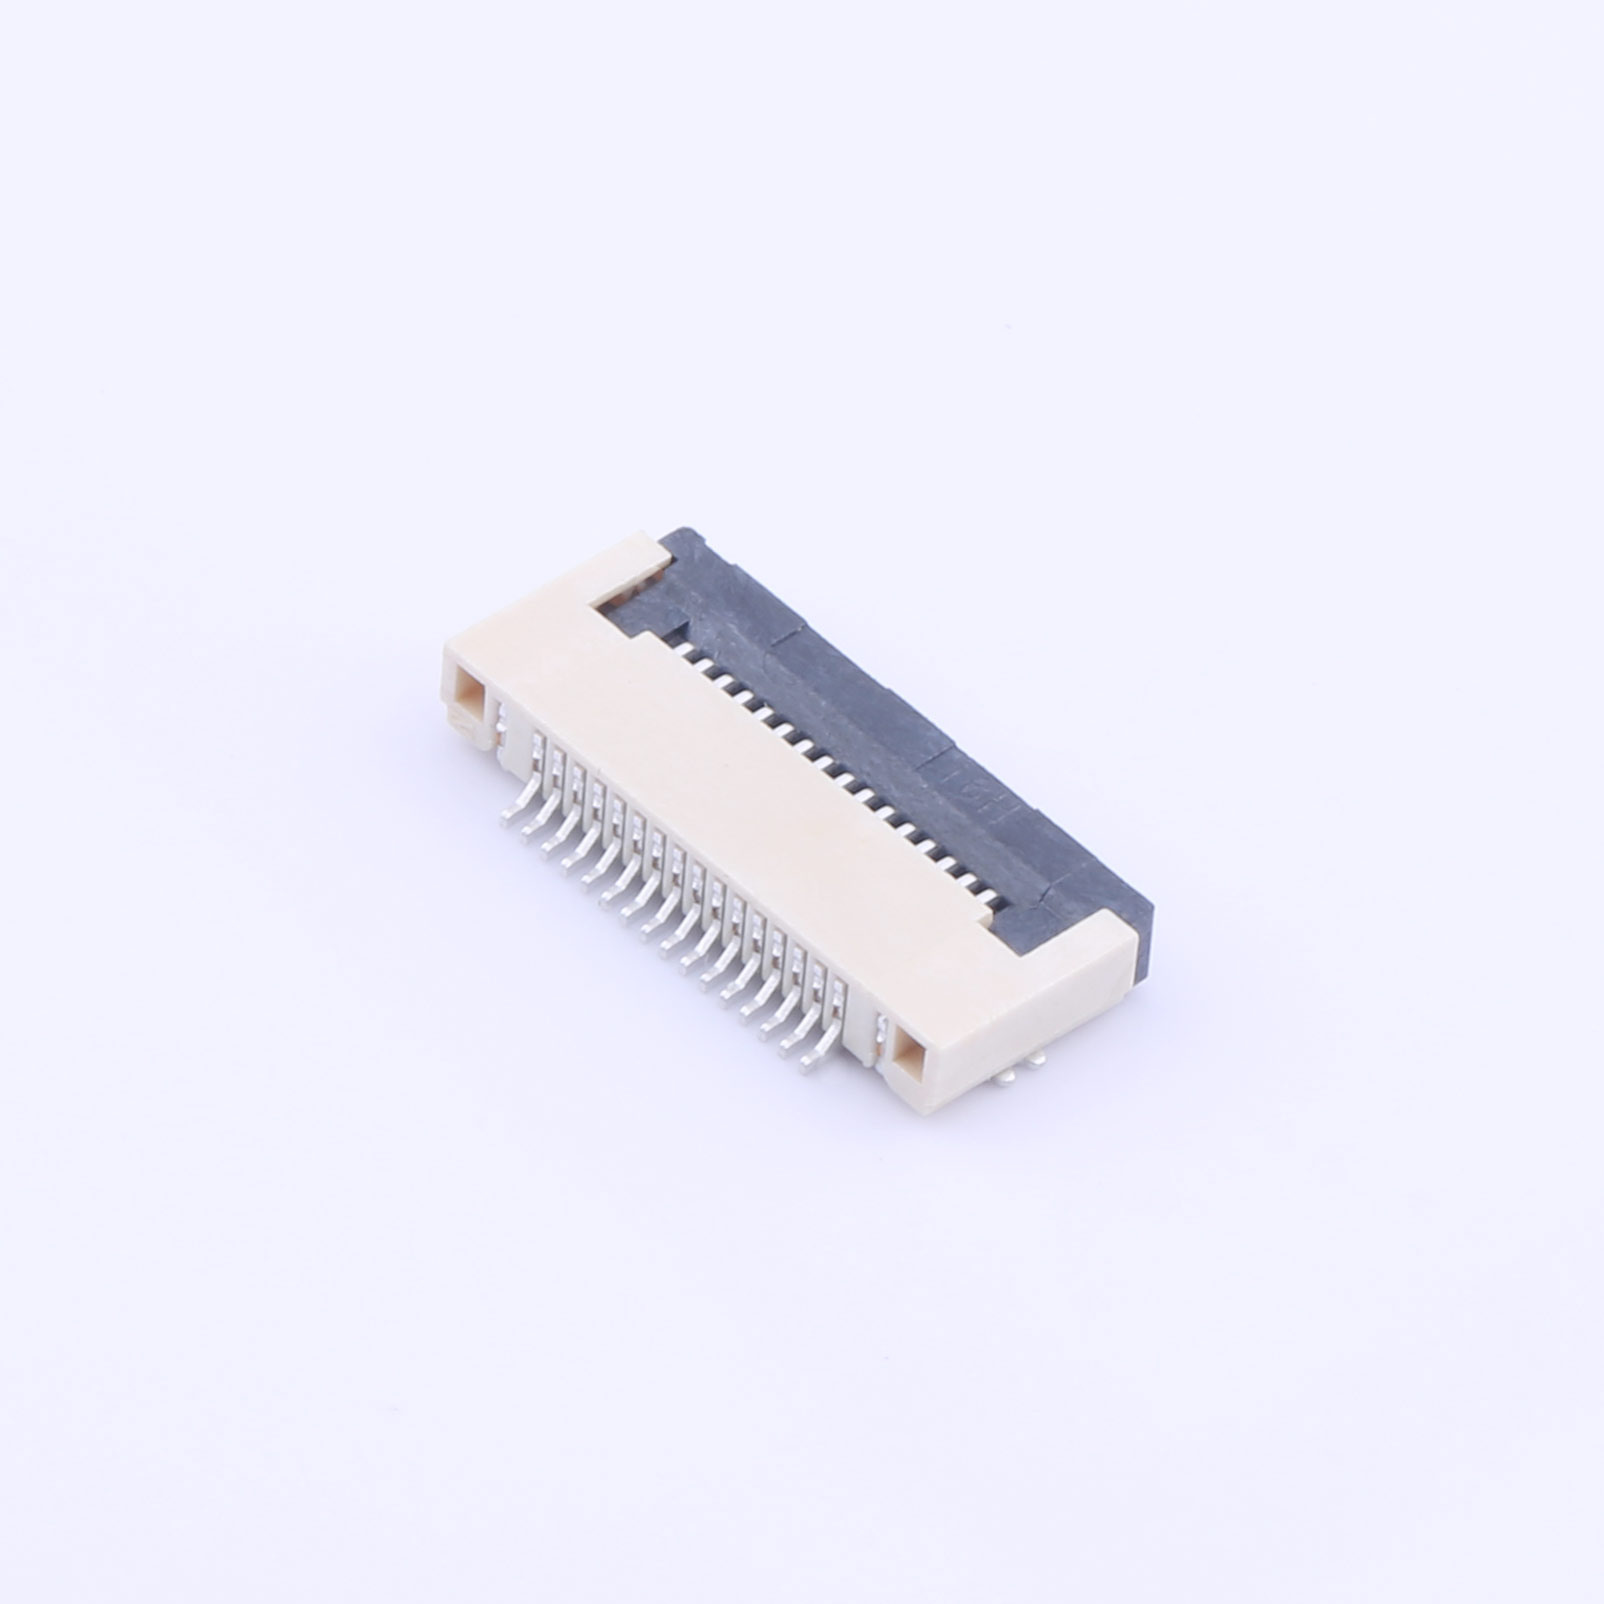 Kinghelm 0.5mm Pitch FPC FFC Connector 16P Height 2mm Front Flip Bottom Contact SMT FPC Connector--KH-FG0.5-H2.0-16PIN